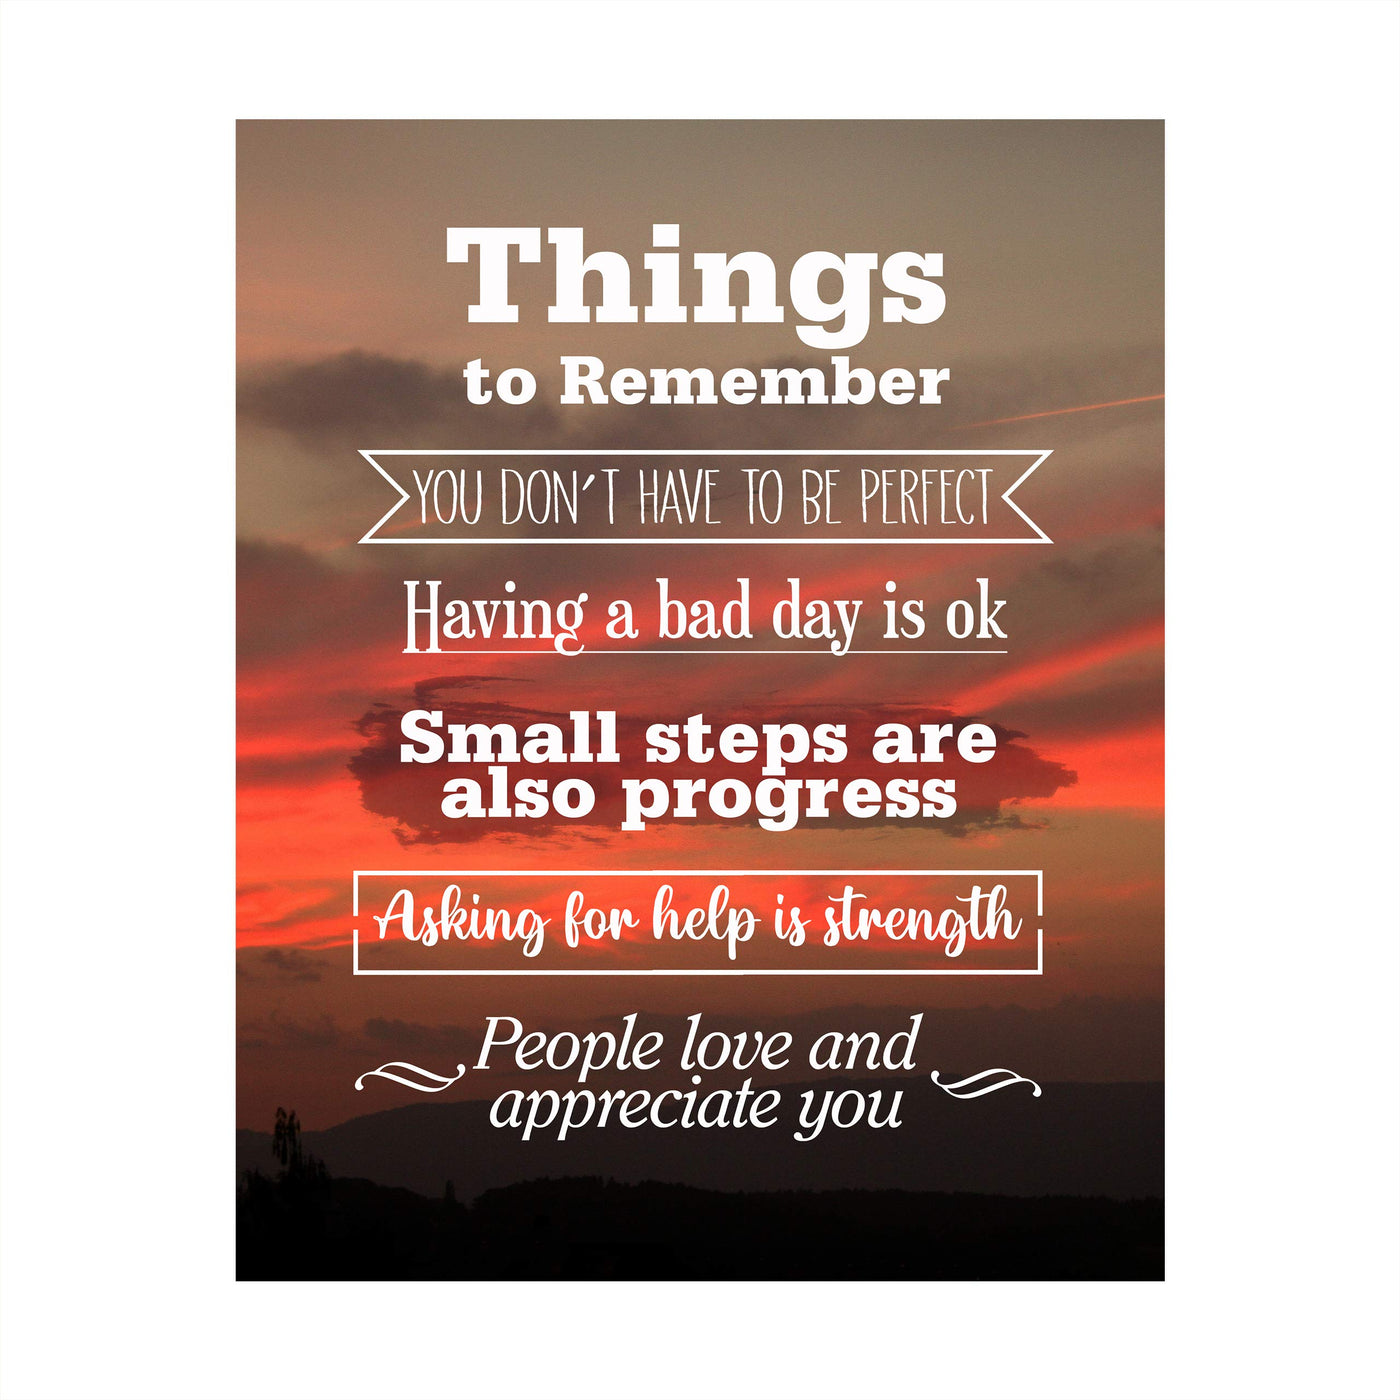 Things to Remember-Make Life Better-Wall Art Sign- 8 x 10" Inspirational Sunset Print-Ready to Frame. Motivational Print for Home-Office-School-Dorm Decor. Great Reminders for Inspiration!